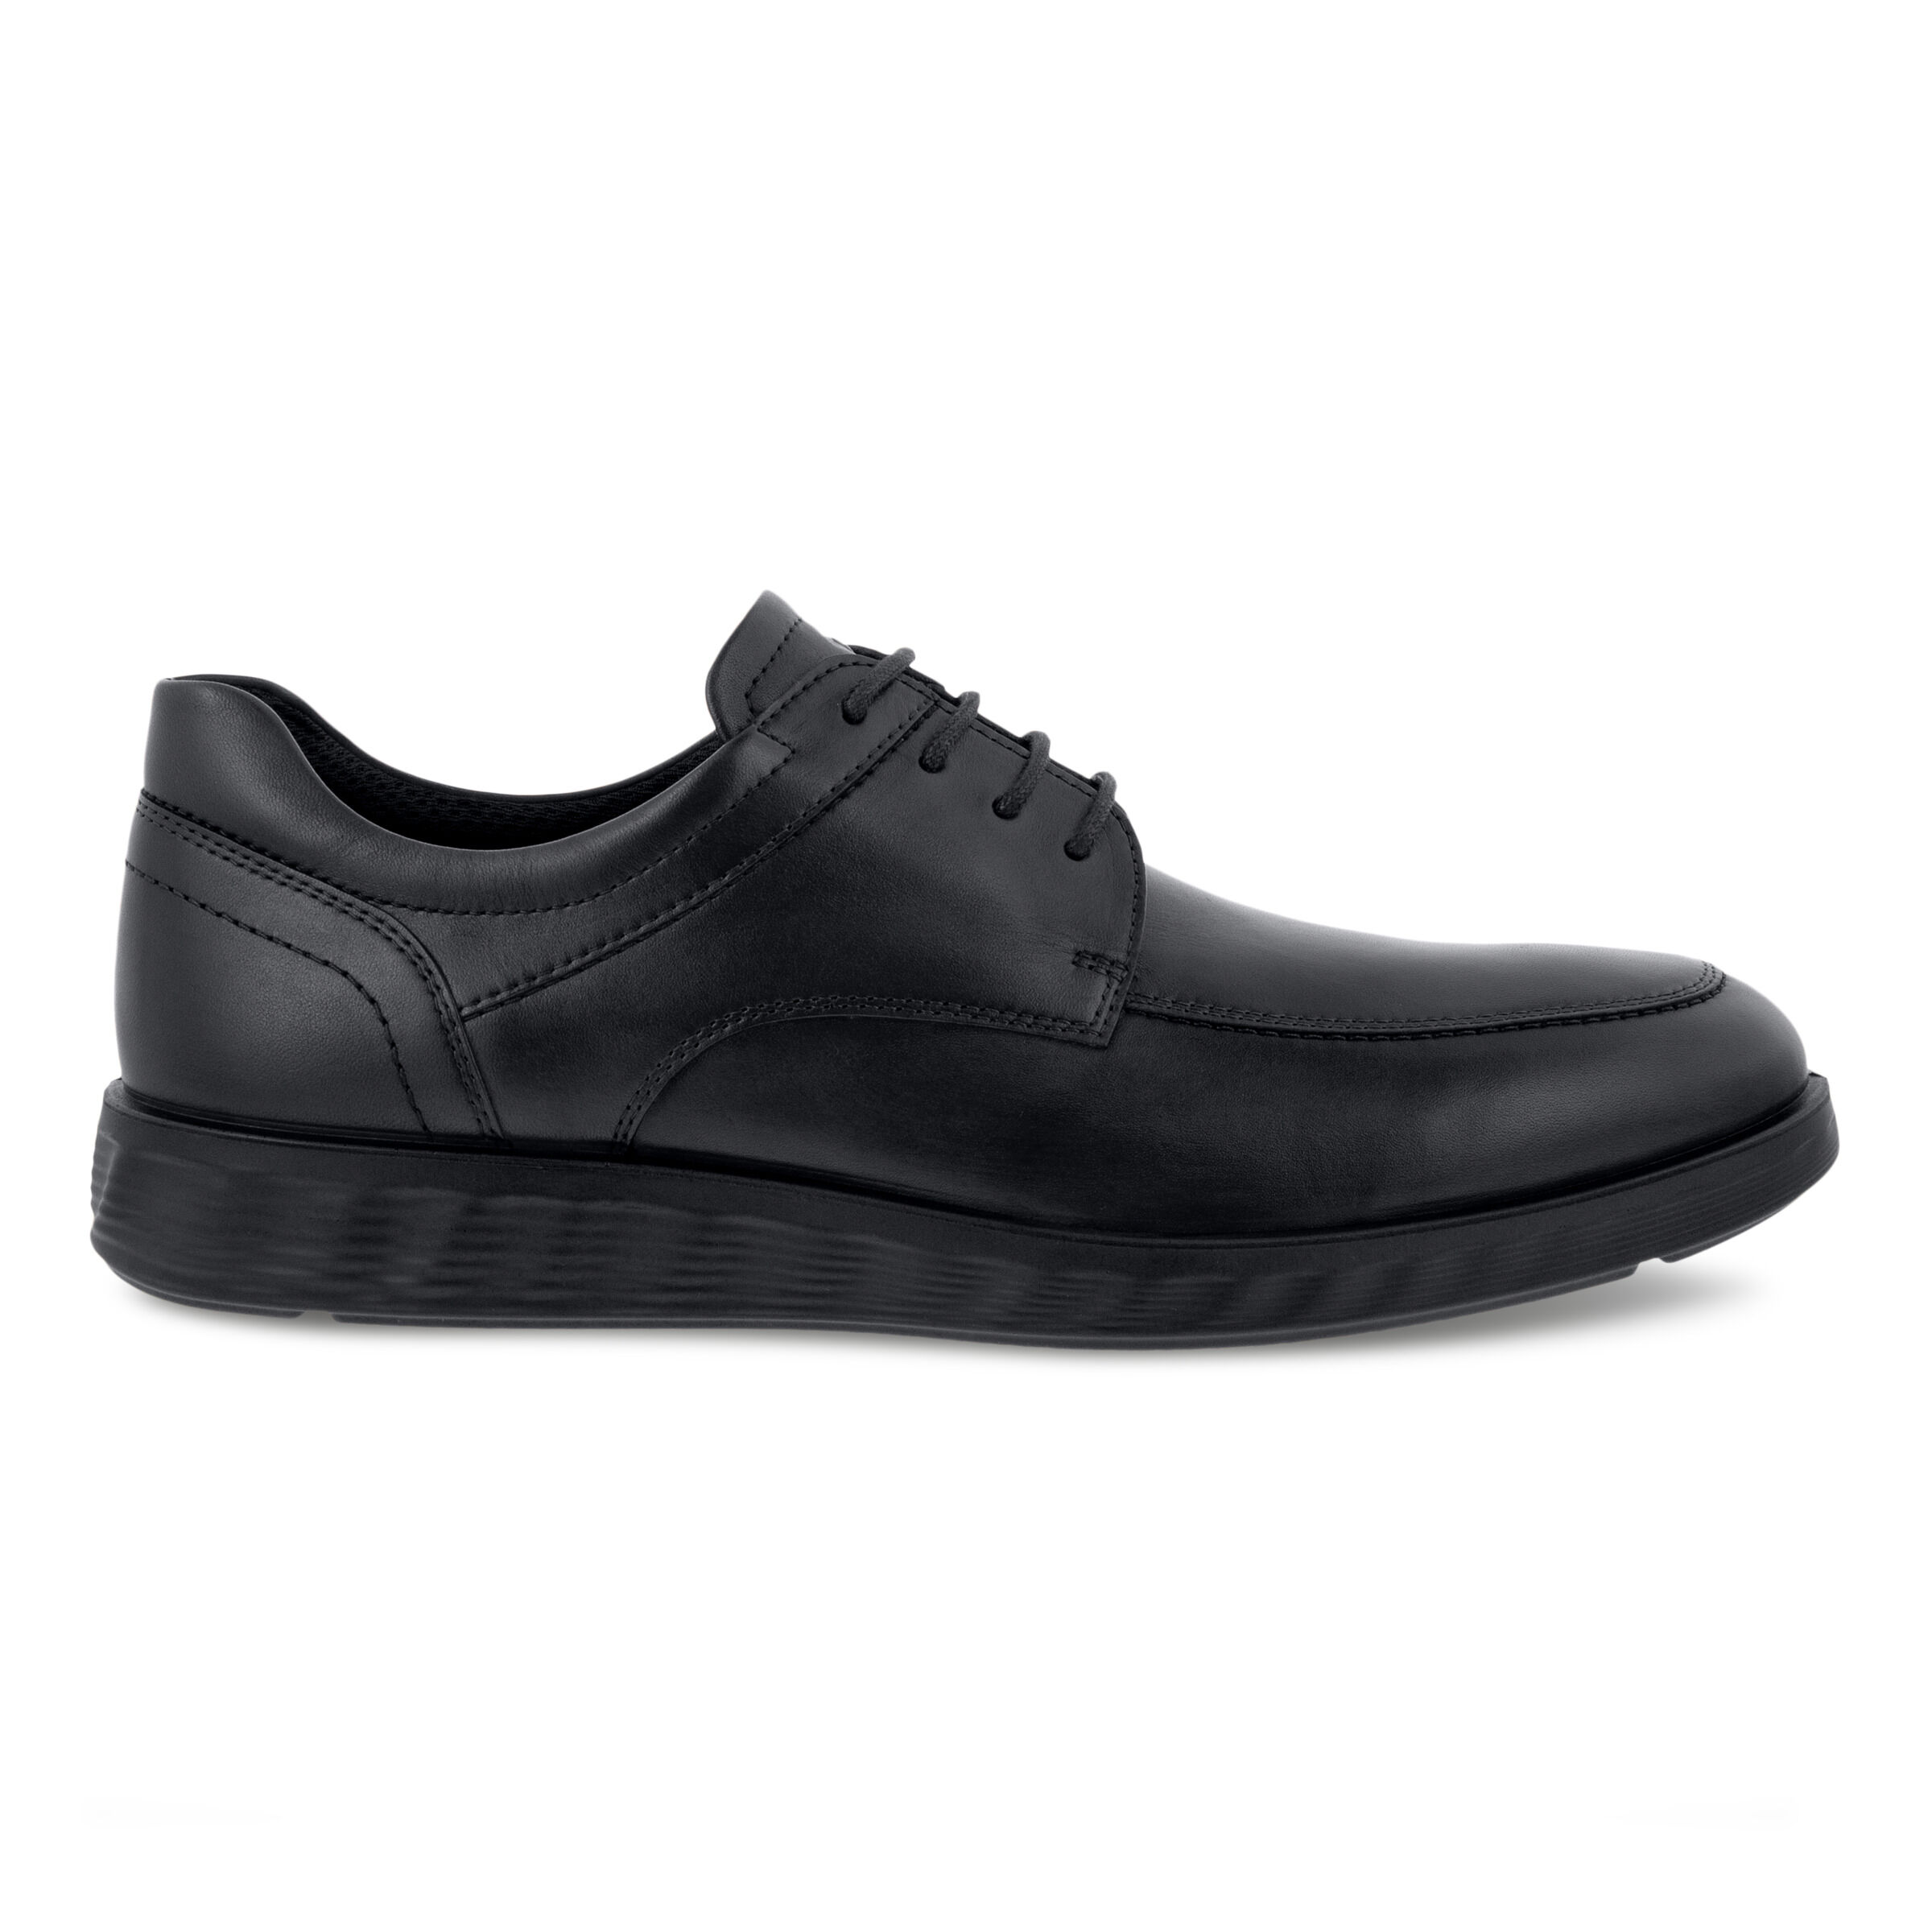 Men's shoes - Find your ideal style - Official ECCO® store